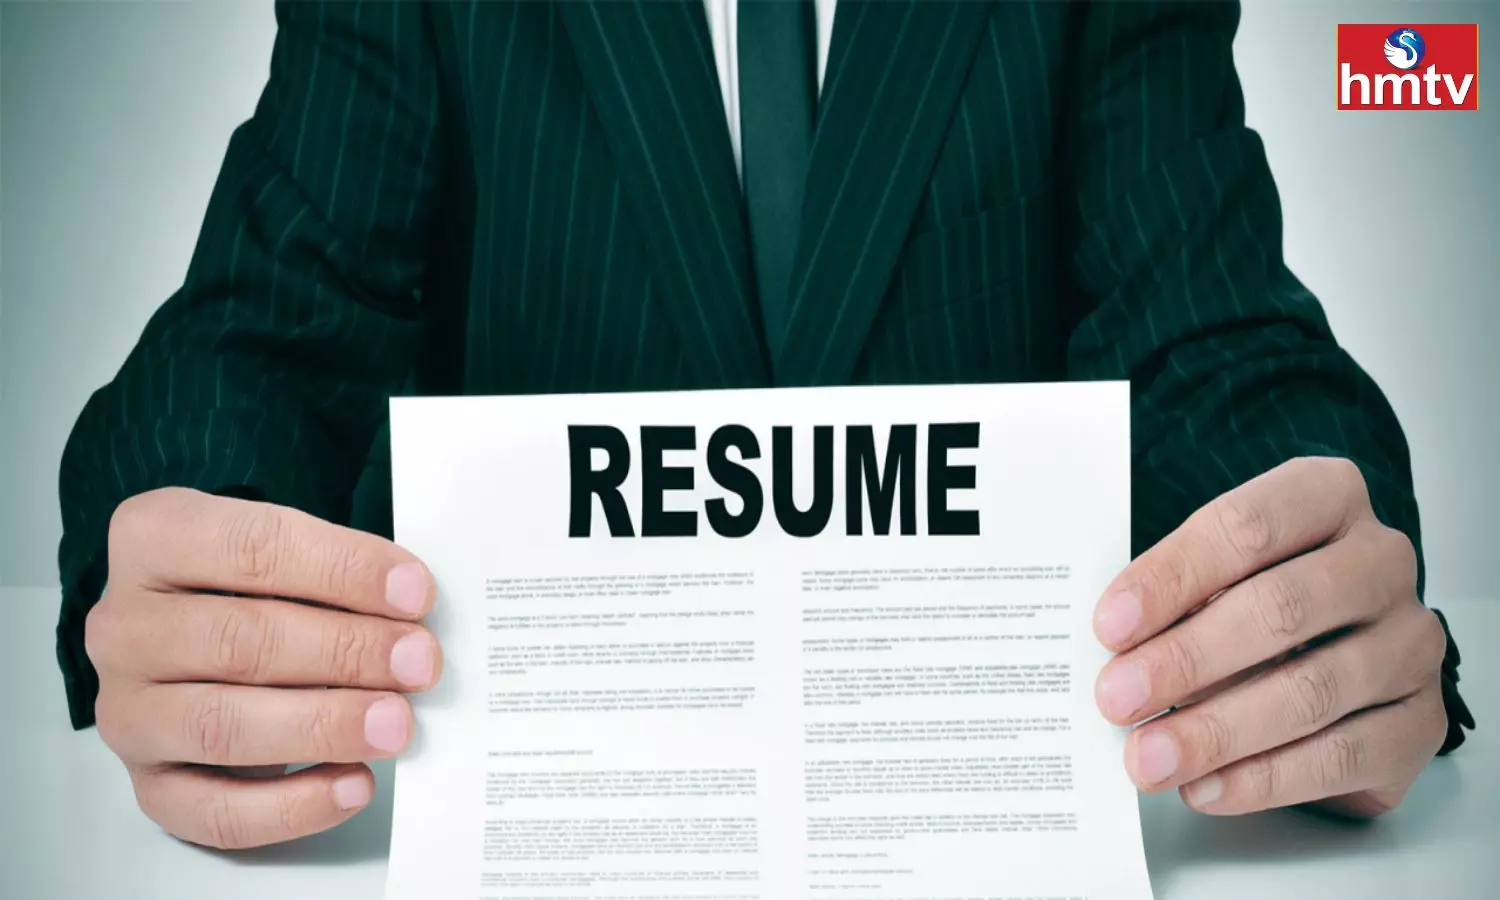 Resume Should be Good before Applying for a Job Dont Make These Mistakes